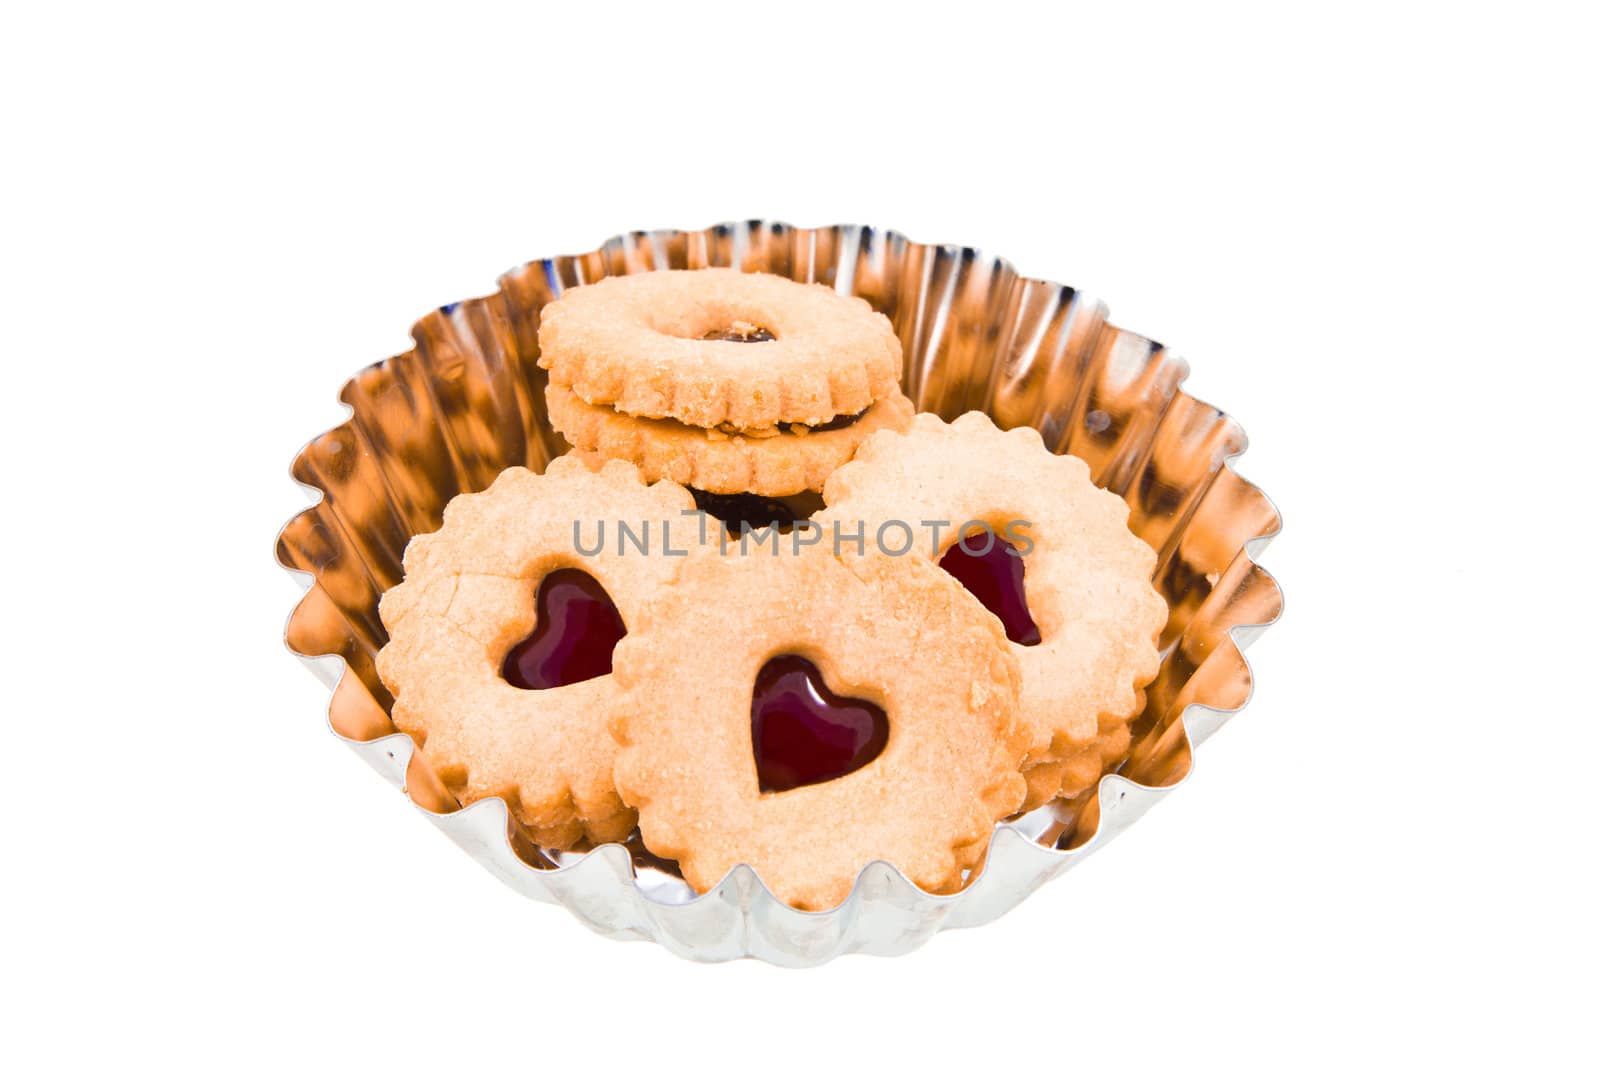 Round cookie with a heart of red jam on white background by huntz